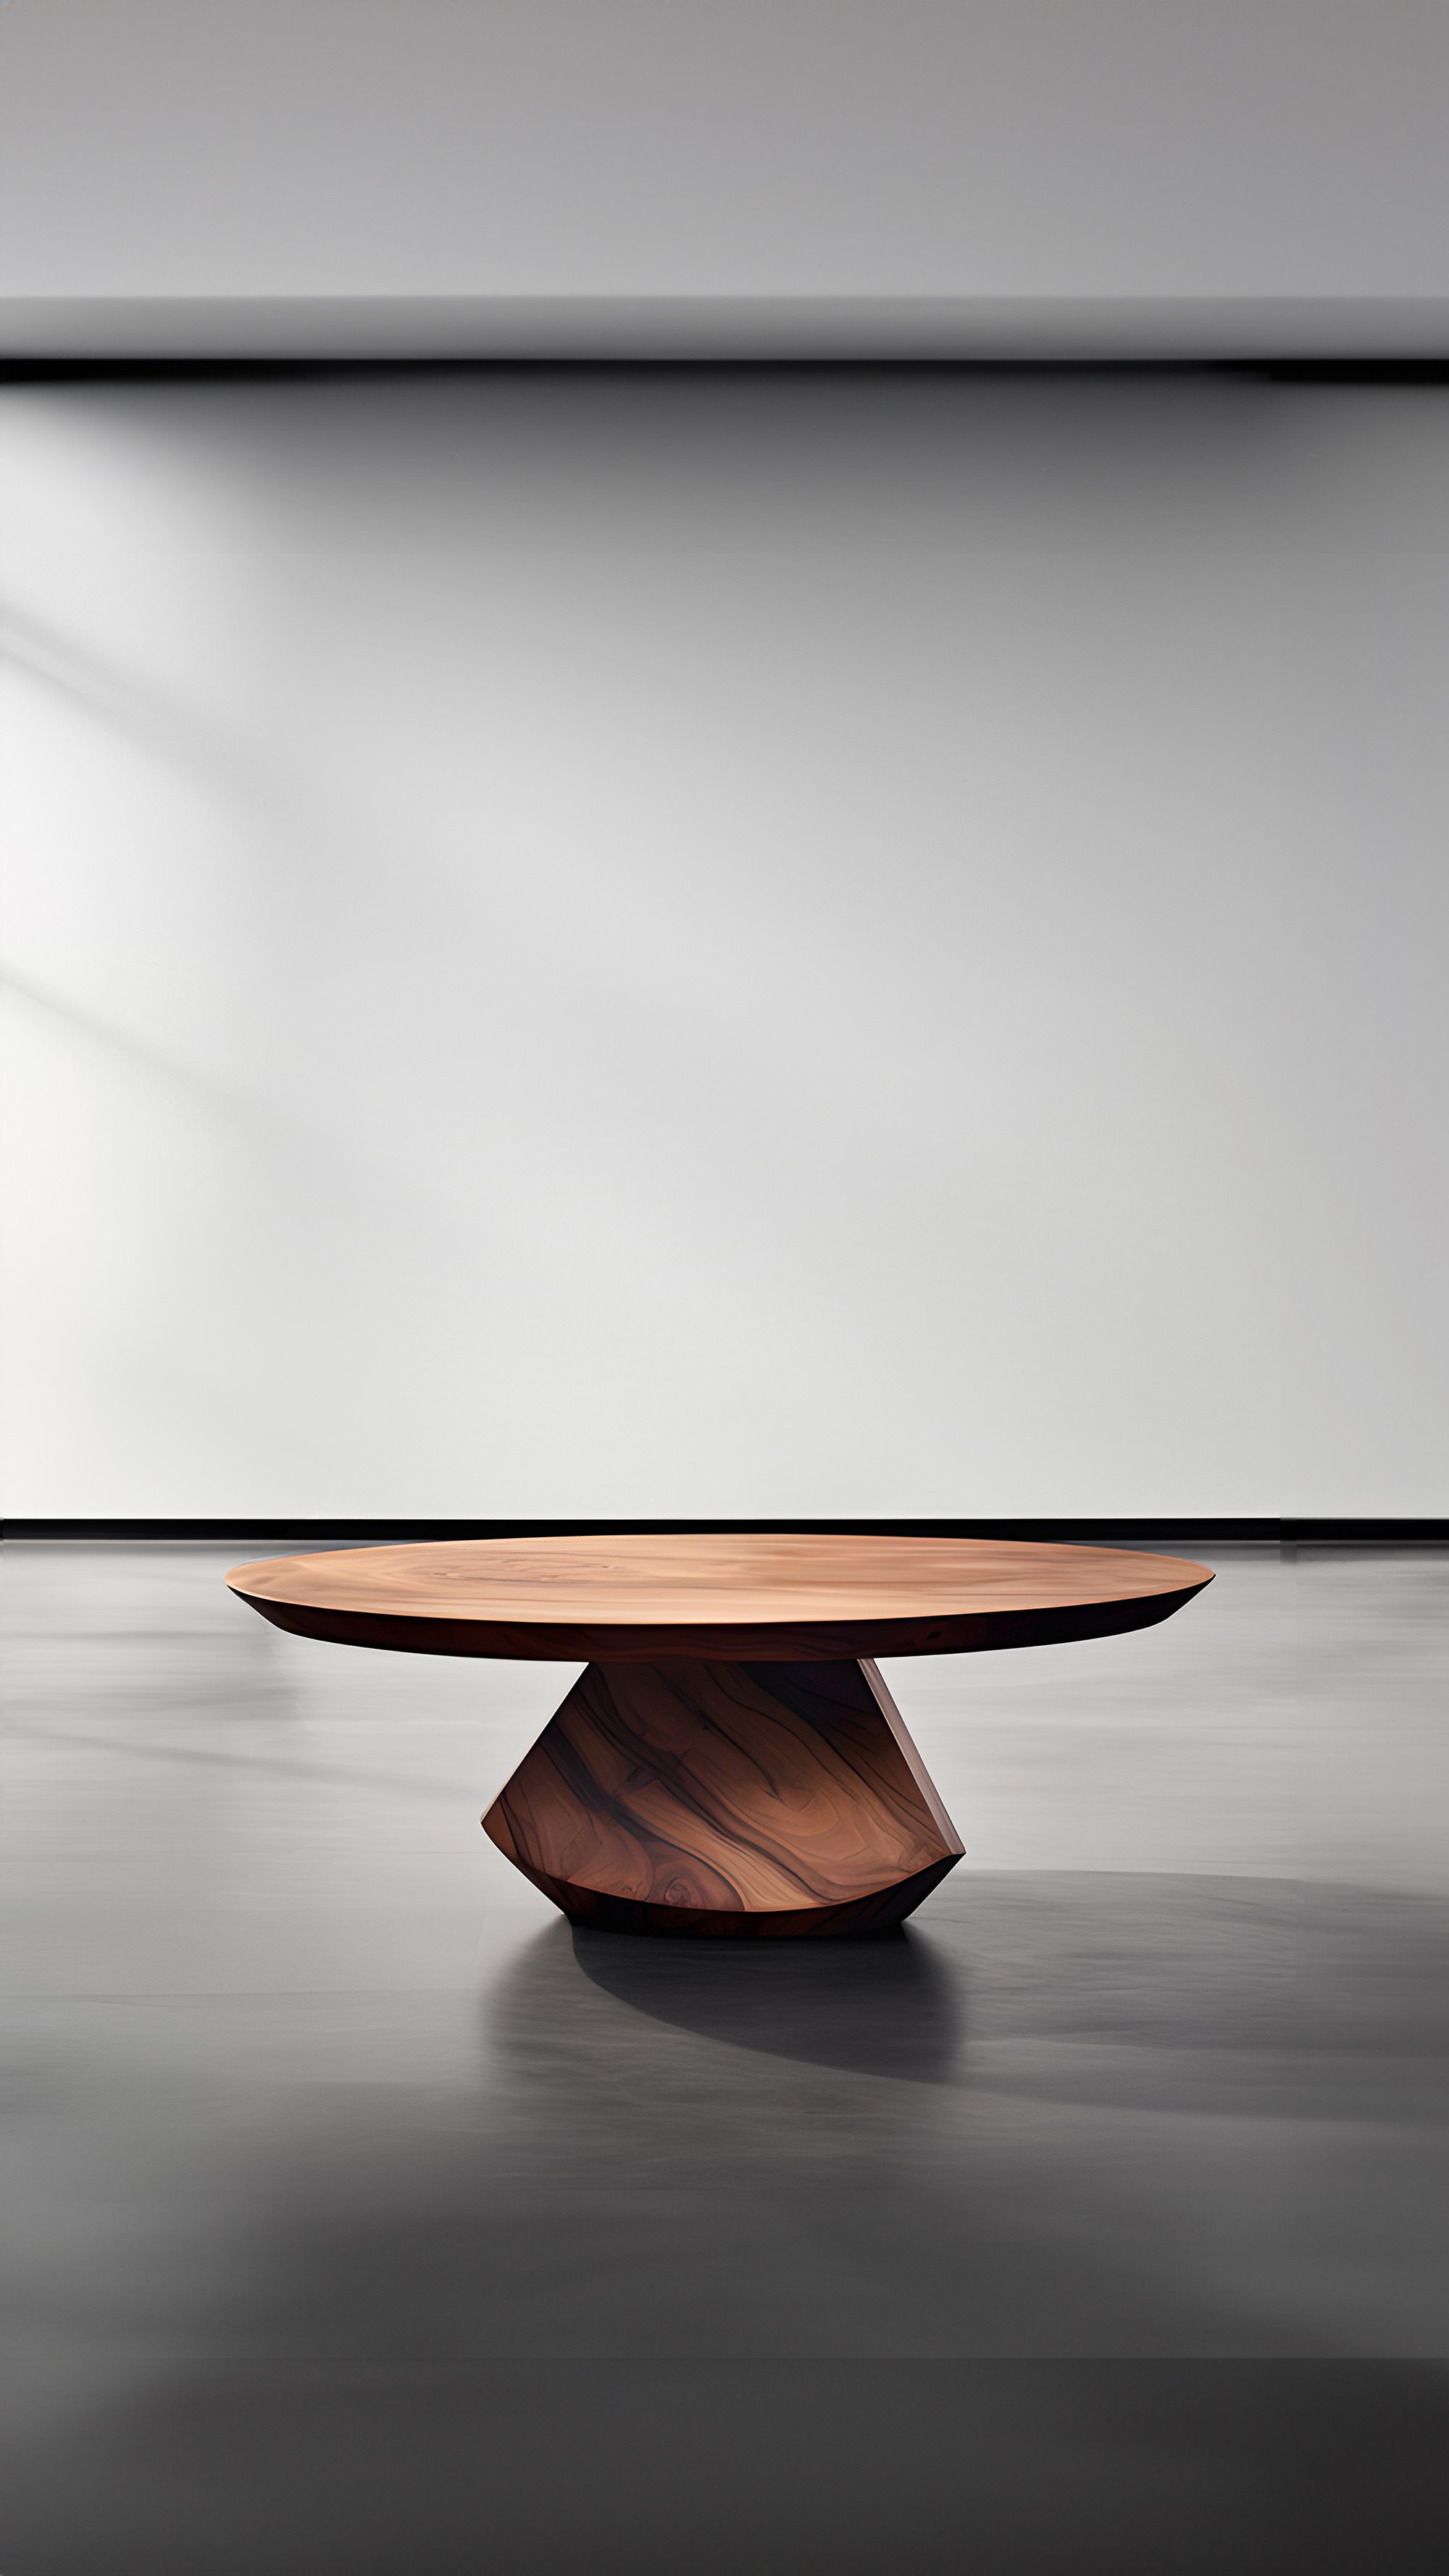 Sculptural Coffee Table Made of Solid Wood, Center Table Solace S41 by Joel Escalona — 8.jpg